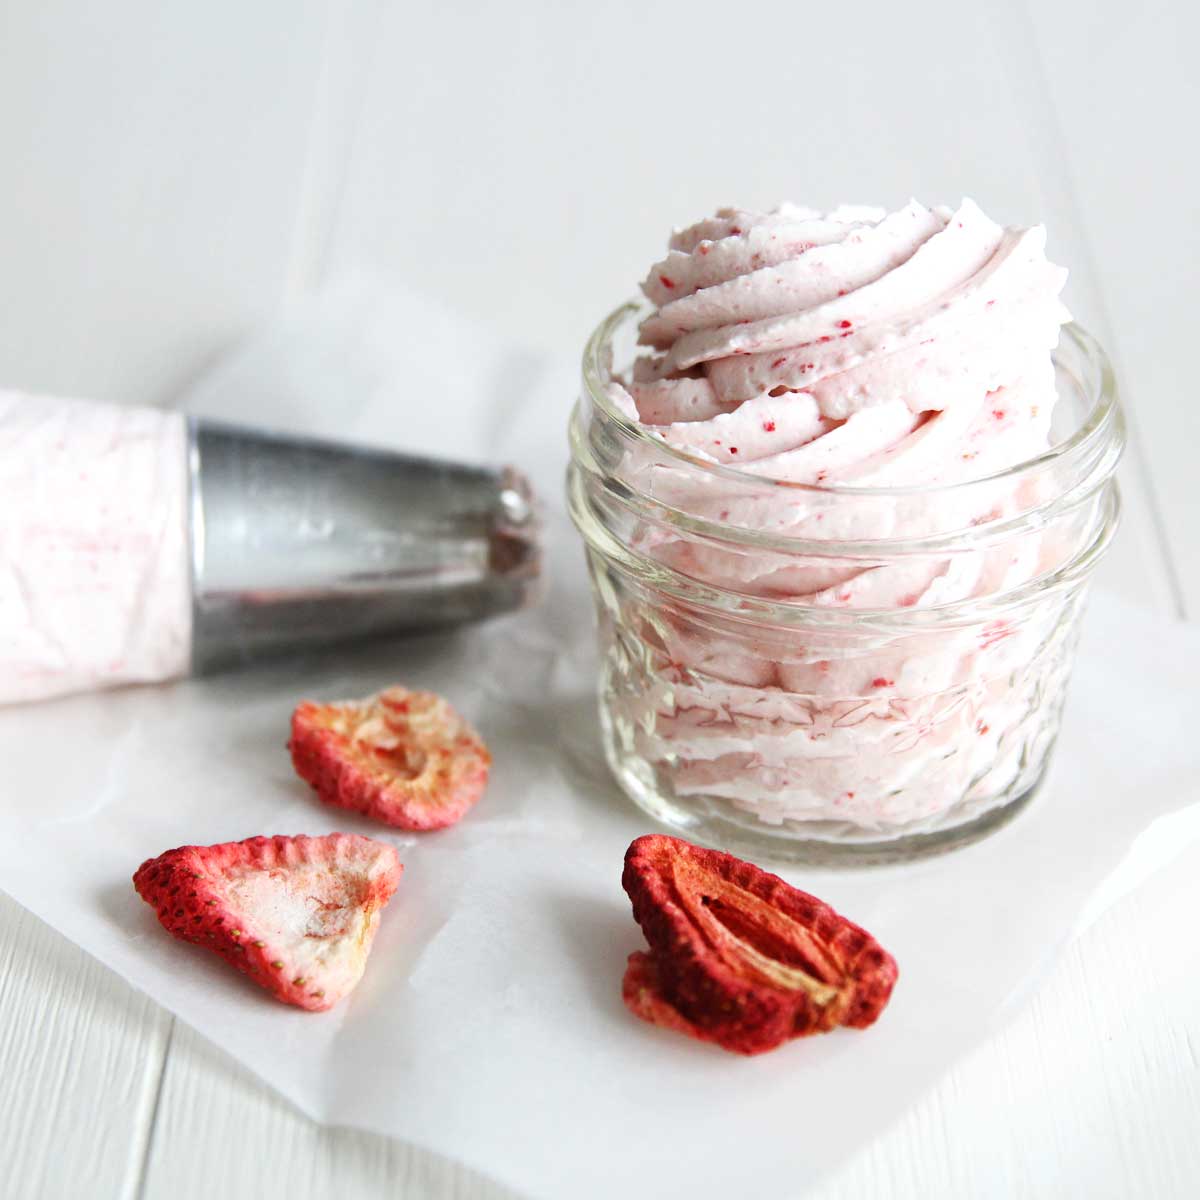 Creamy & Thick Strawberry Cheesecake Whipped Cream (Low-Carb, Keto Recipe) - Strawberry Japanese Roll Cake